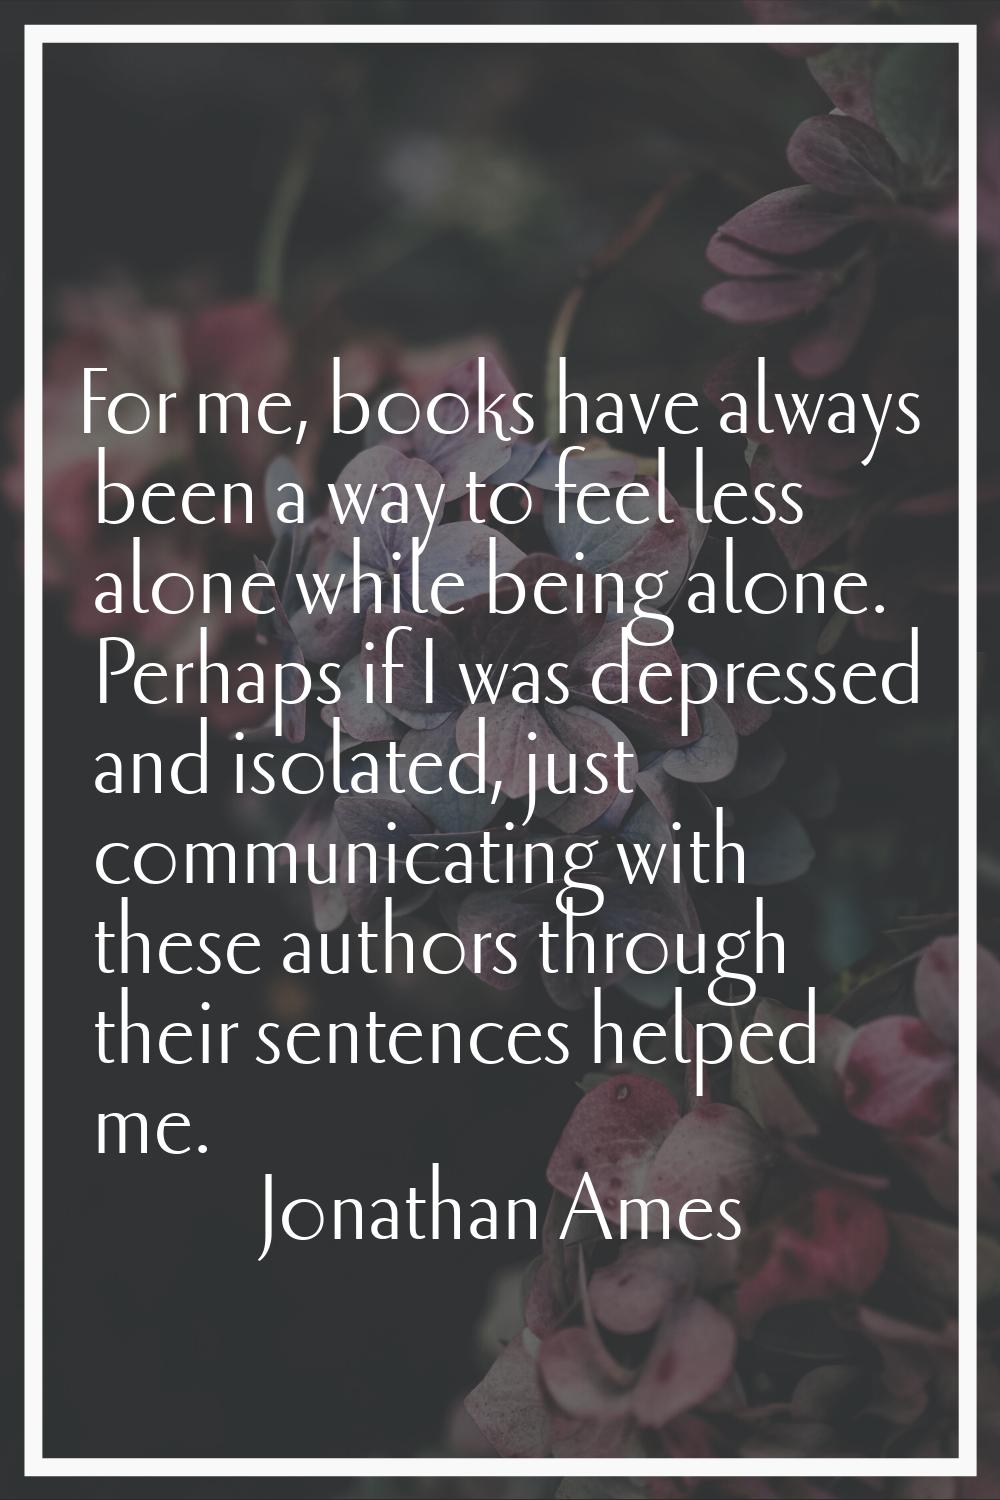 For me, books have always been a way to feel less alone while being alone. Perhaps if I was depress